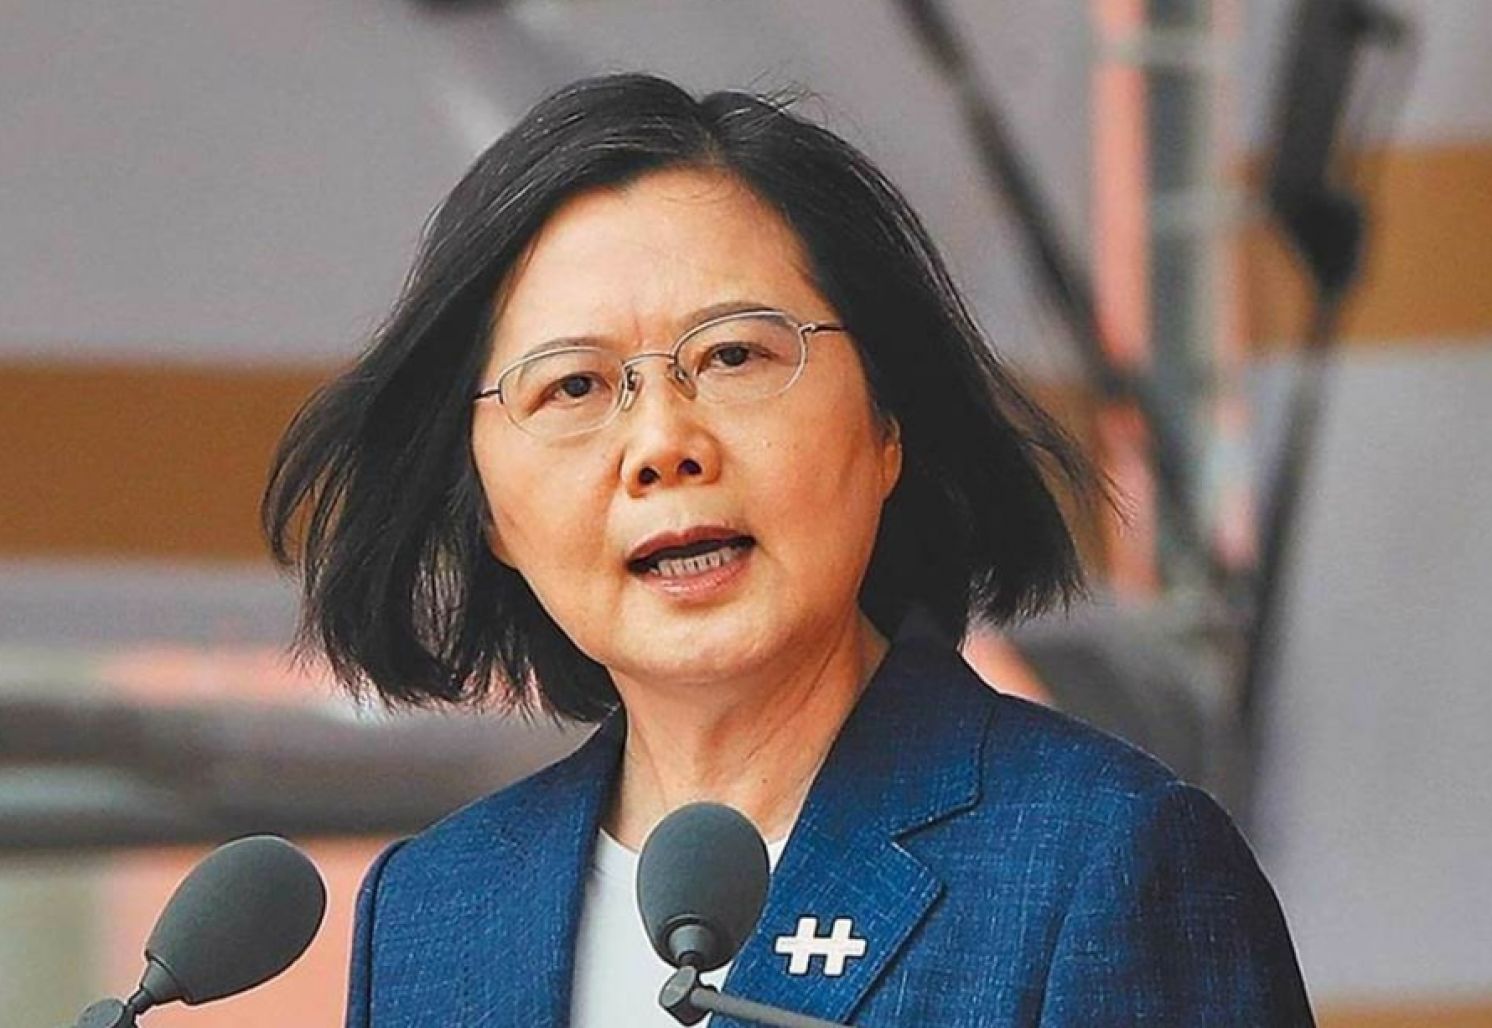 Rescuing President Tsai's Favorite Boy at the Cost of Academic and Political Conscience